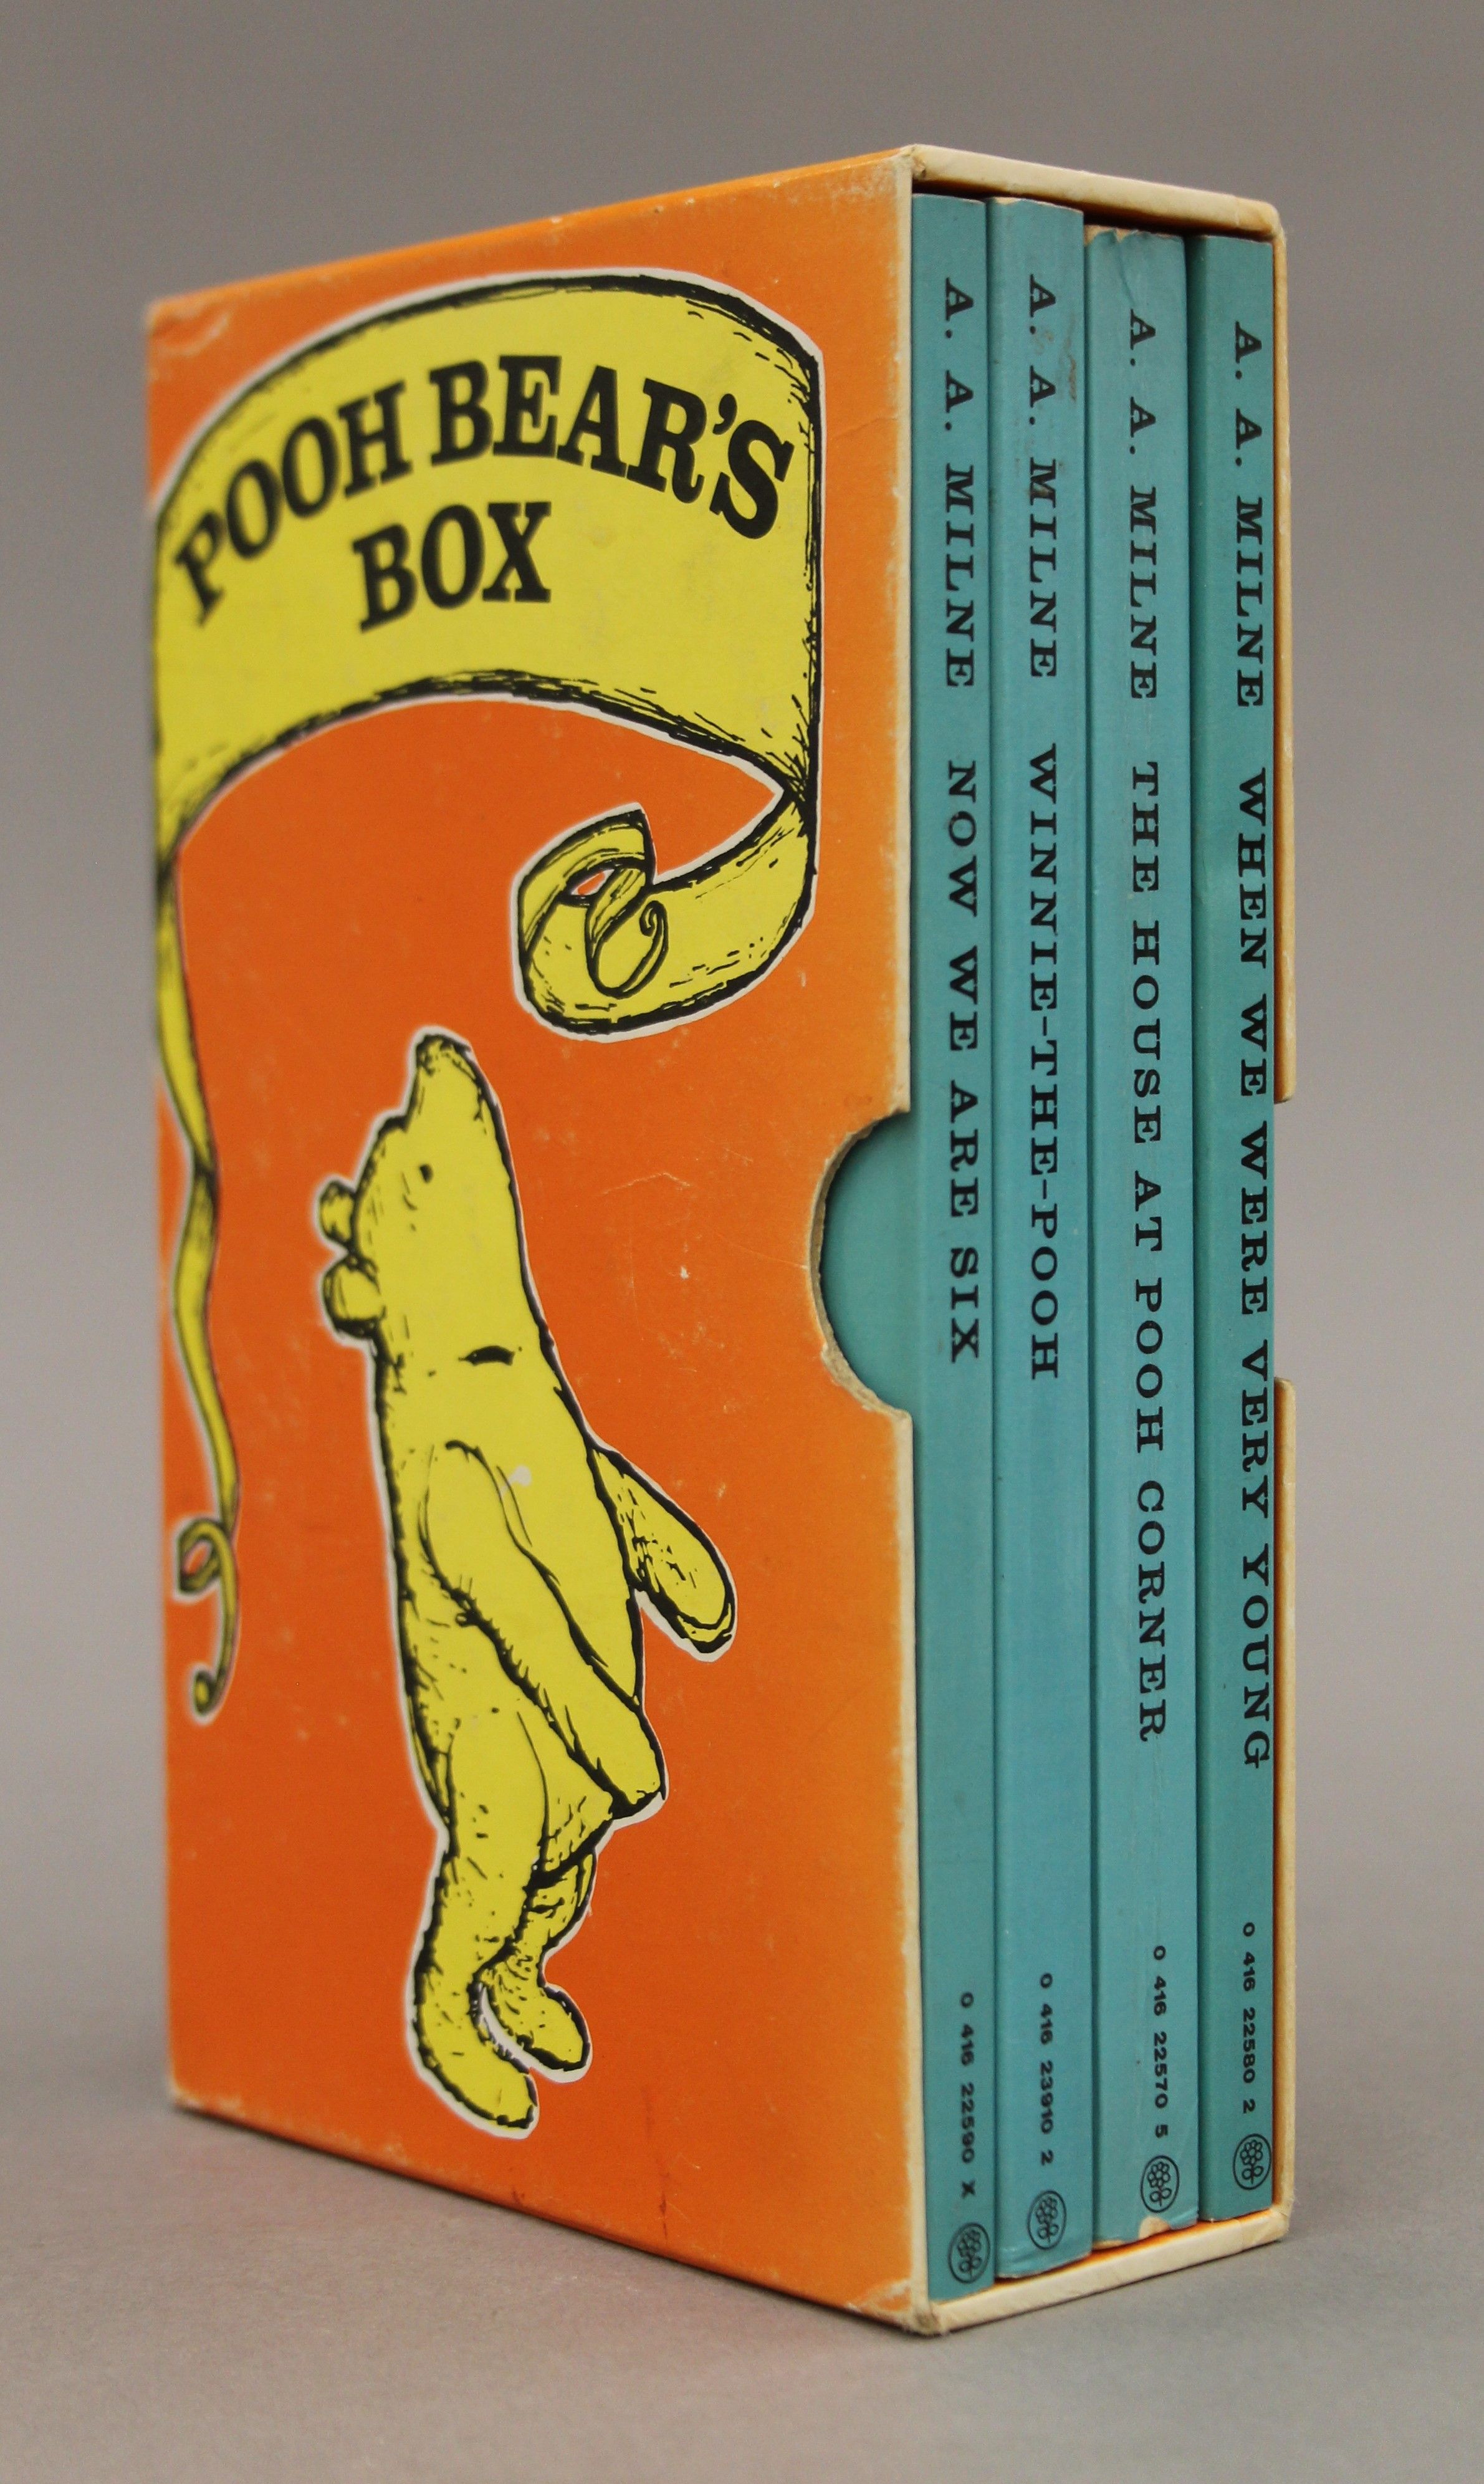 A A Milne, Pooh Bear's Box, containing Winnie-the-Pooh, The House at the Corner, - Image 2 of 8